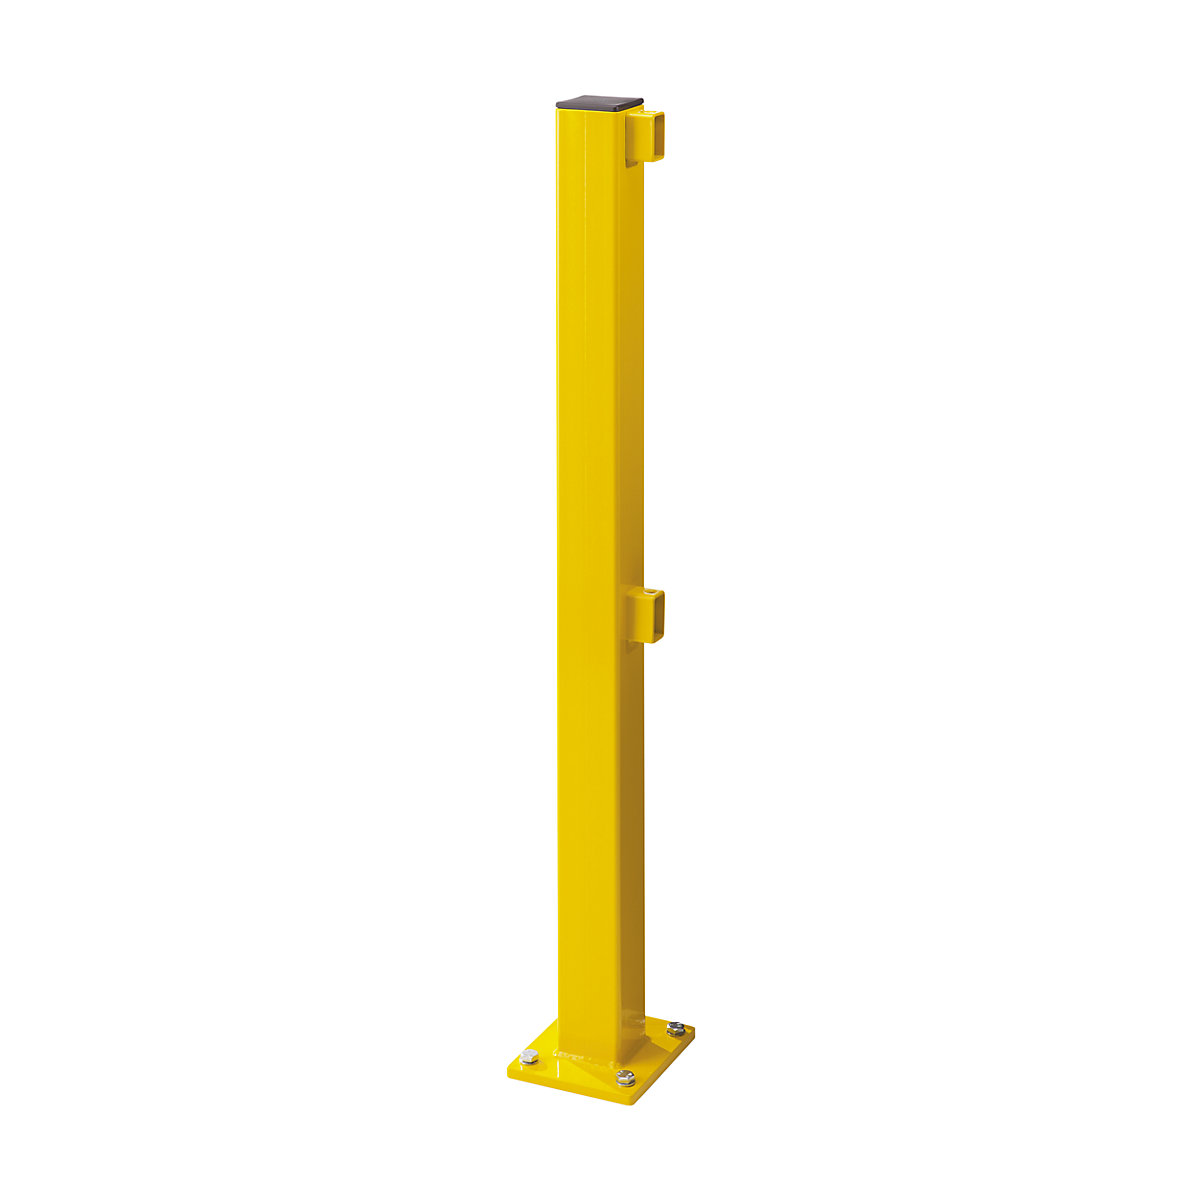 S-Line post for safety railing